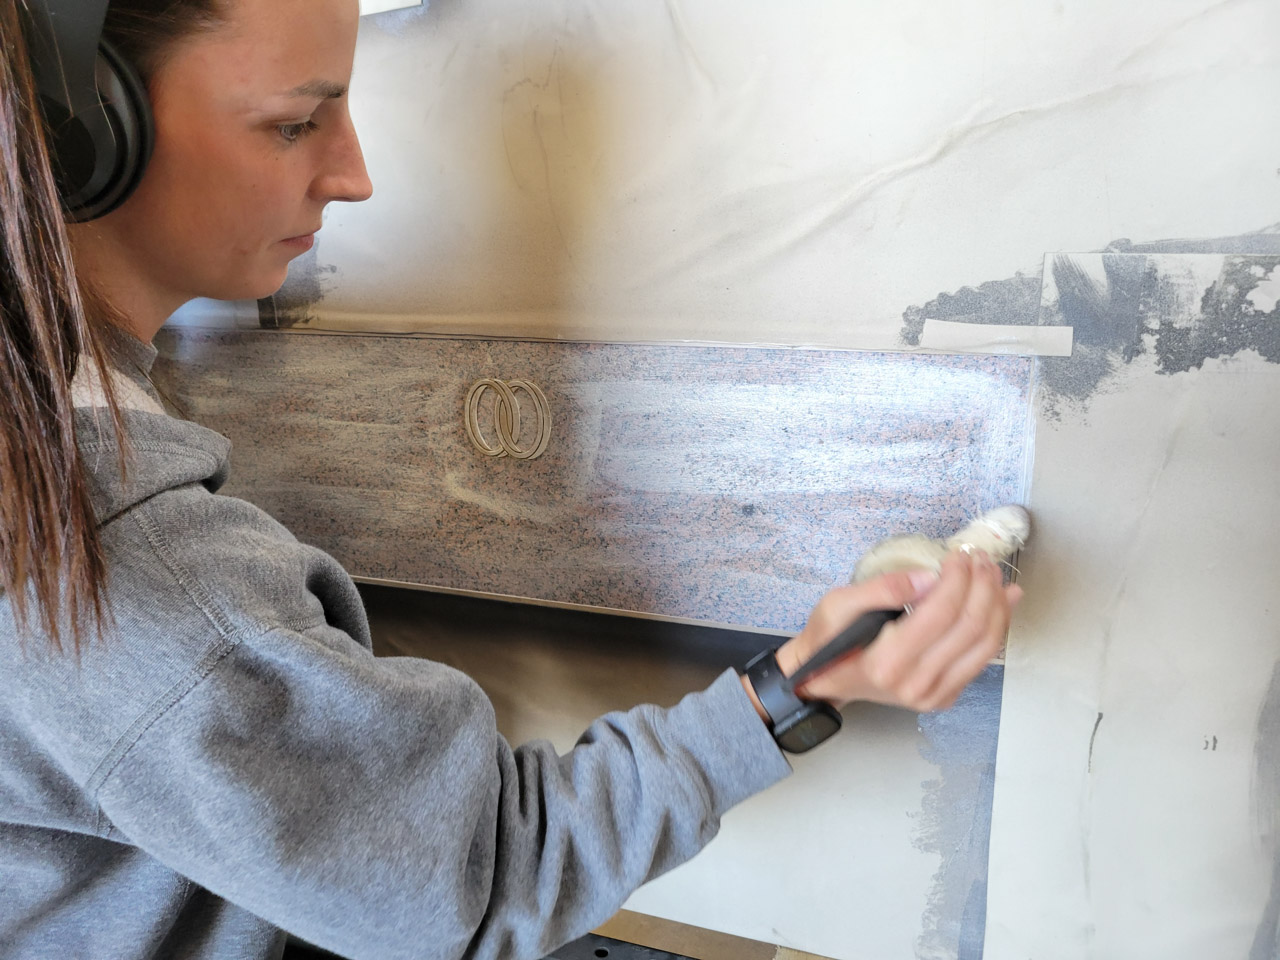 Professional artist carefully applying a stencil to a grey granite monument in preparation for sandblasting